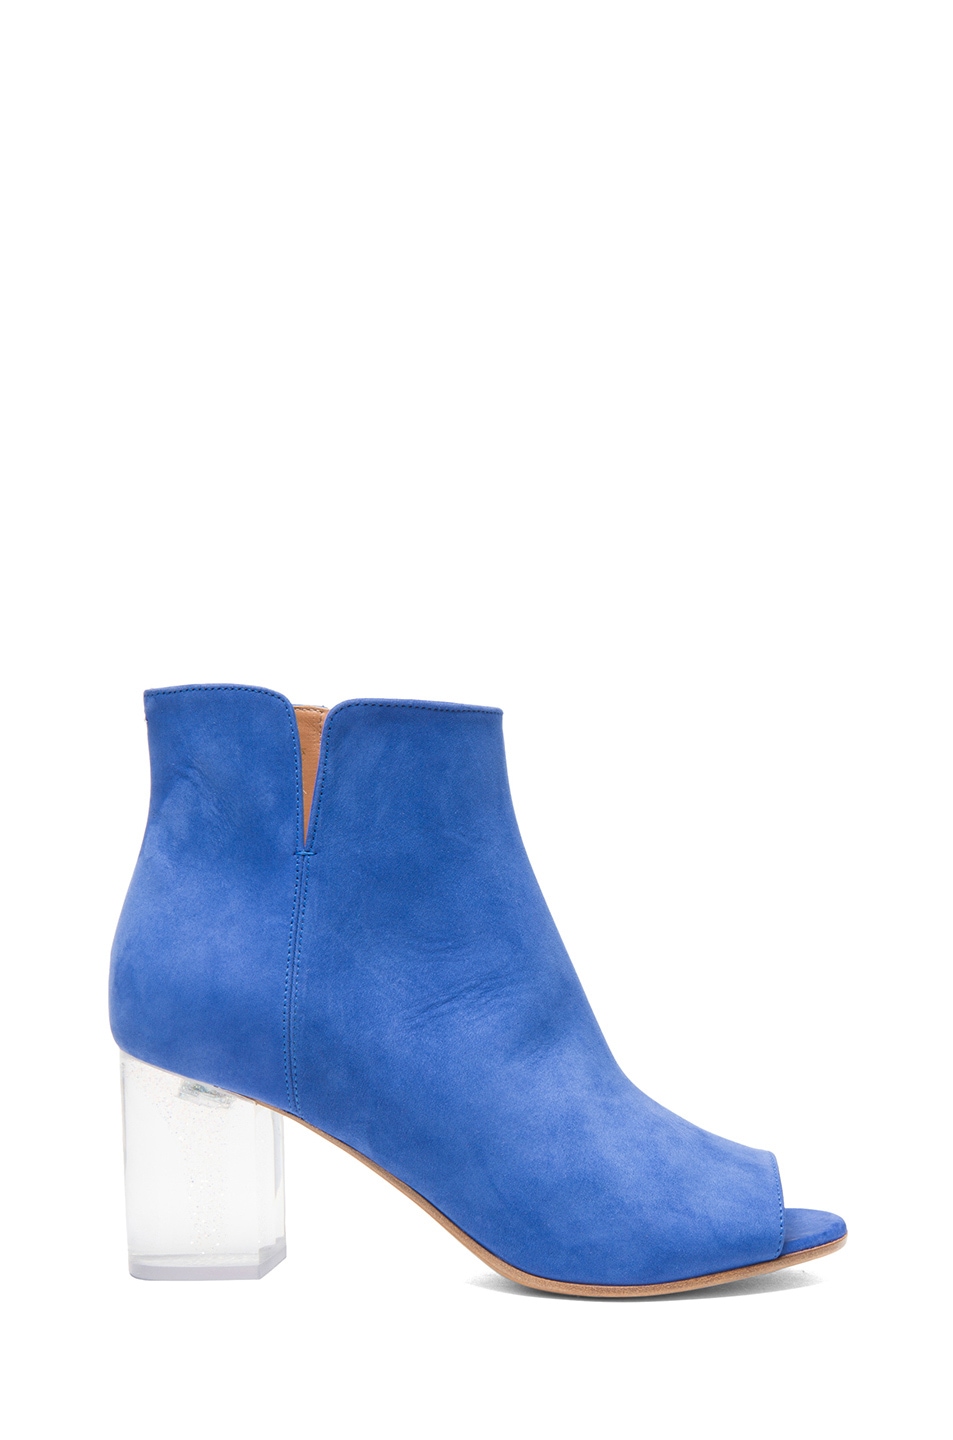 Image 1 of Maison Margiela Suede Booties in Blue